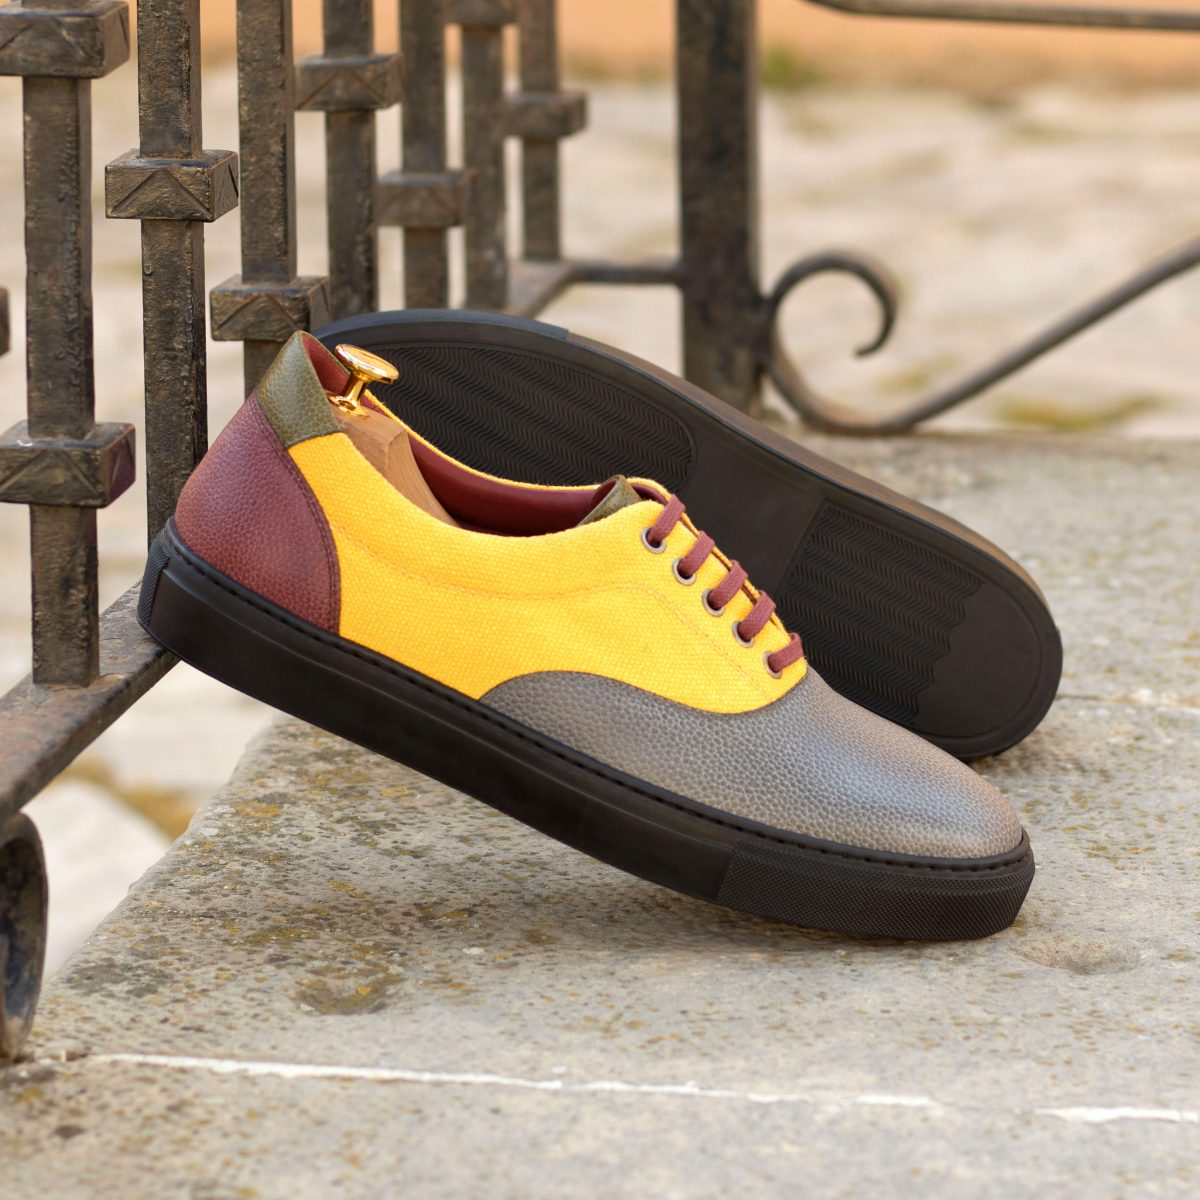 Handmade Top Sider shoes |  Mens Casual